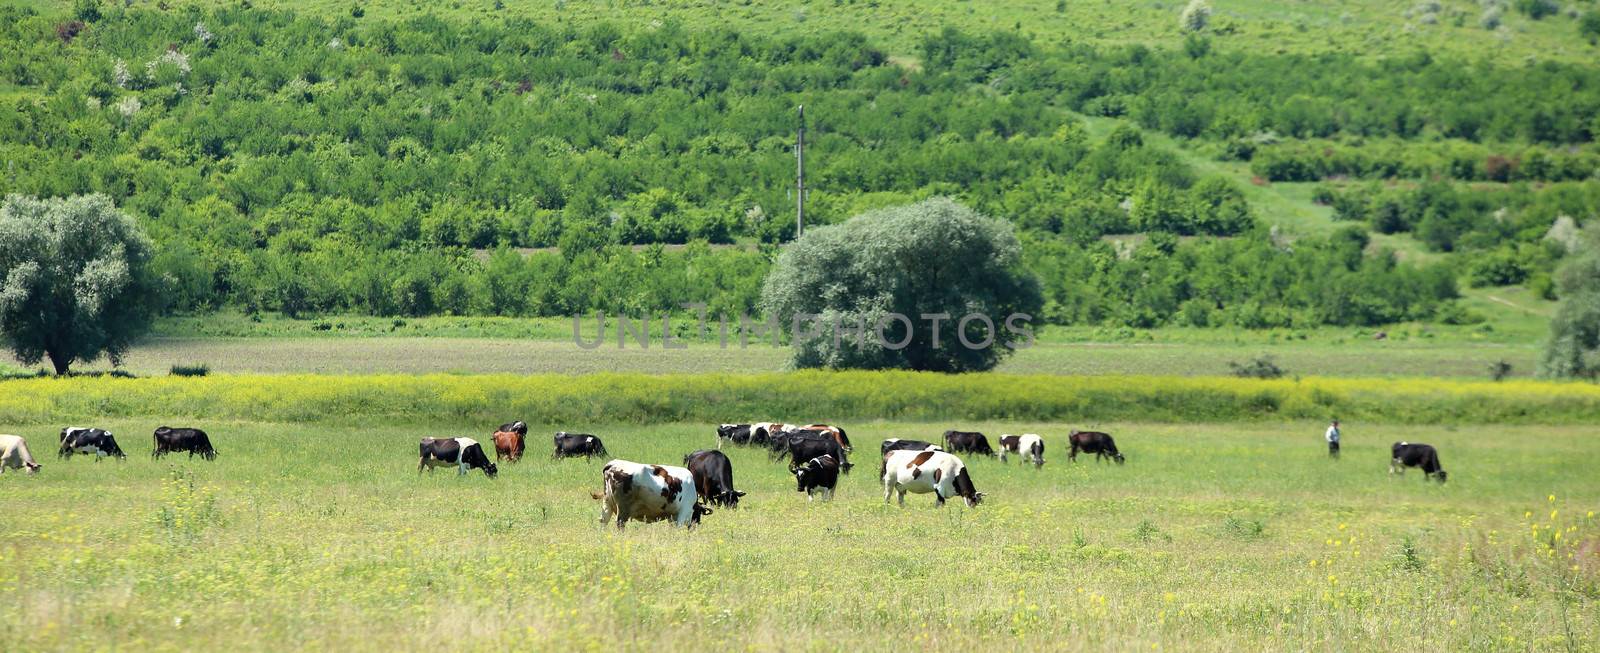 cows grazing in a farmland on whole background